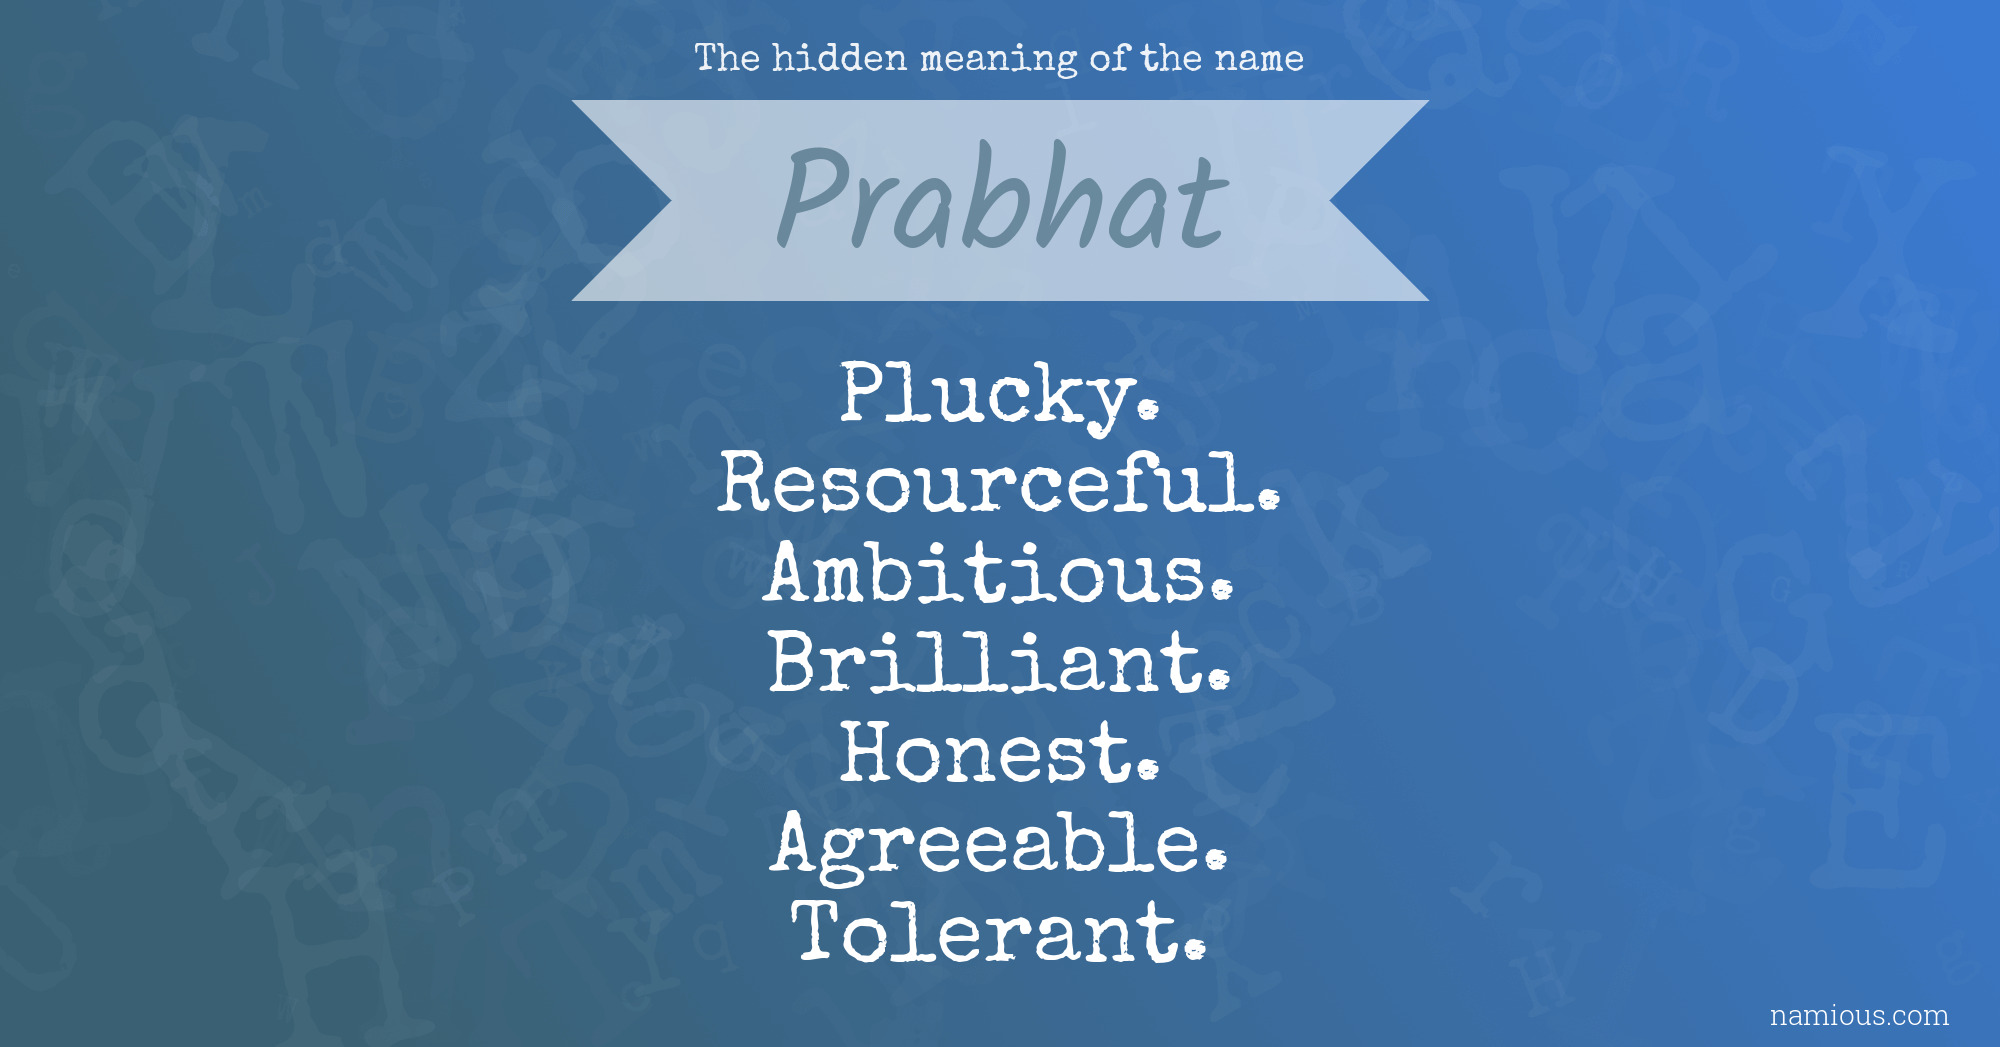 The hidden meaning of the name Prabhat